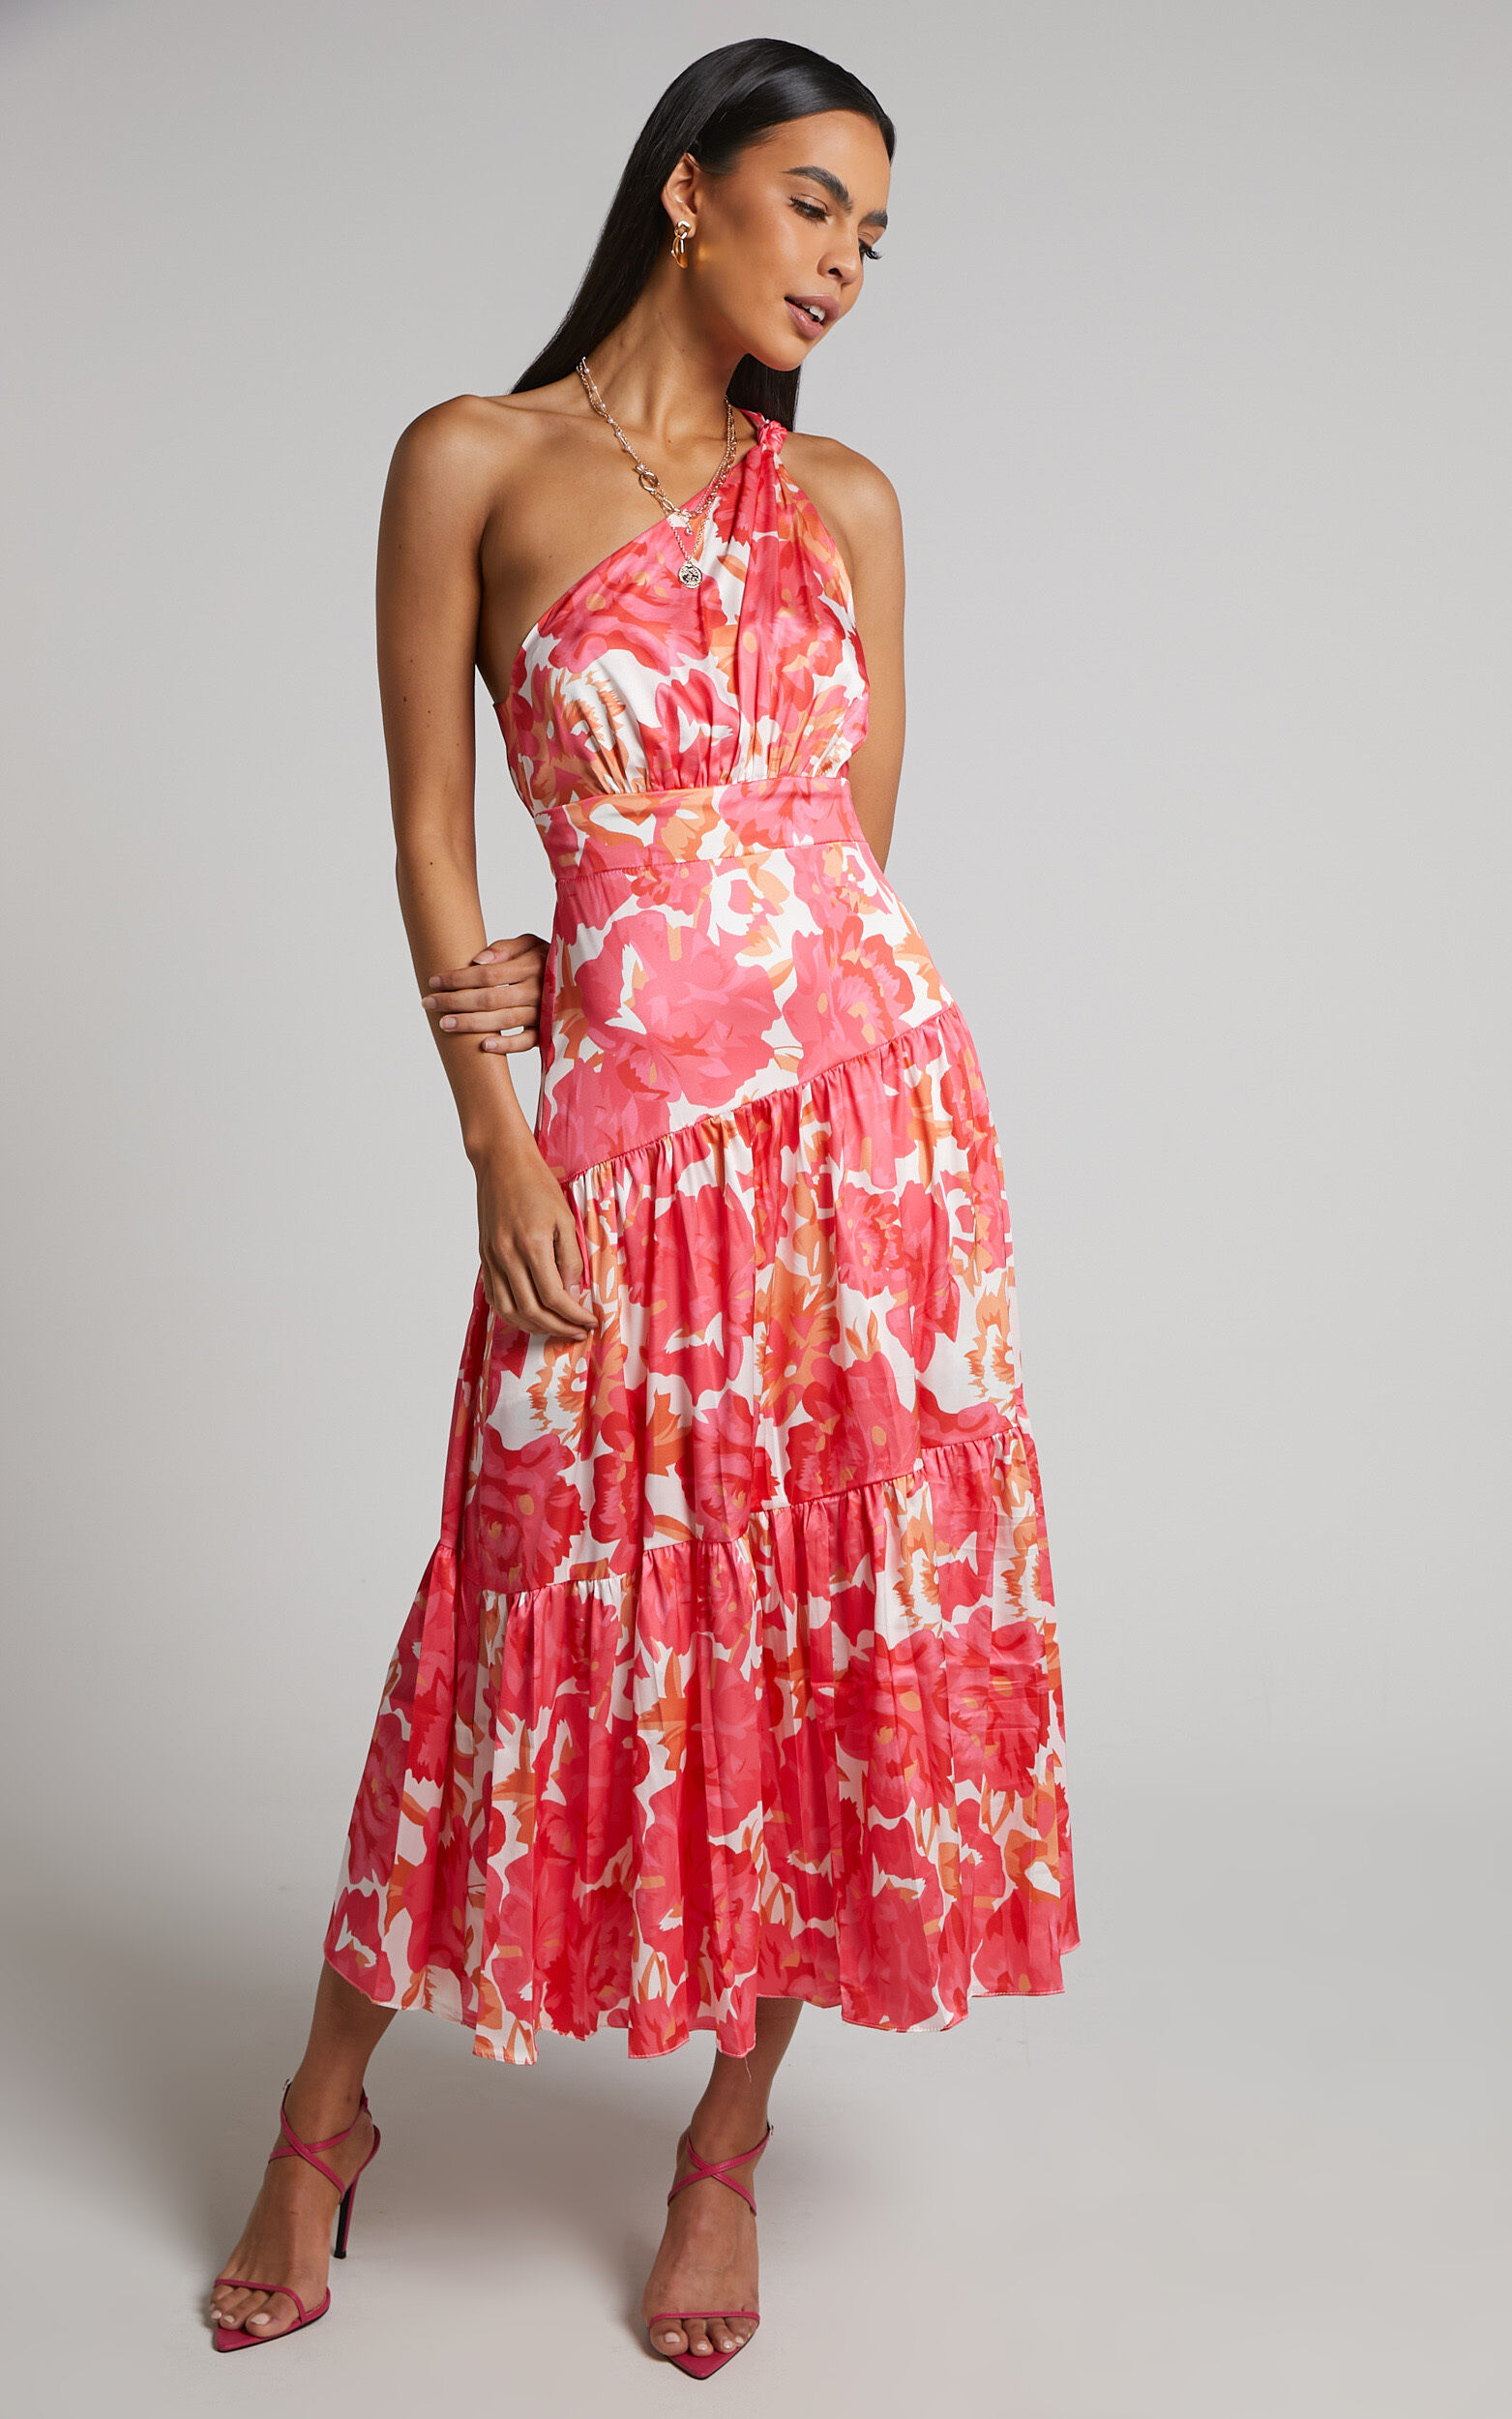 Georgine Midi Dress - One Shoulder Ruched Tiered Dress in Peony Blossom - 06, PNK1